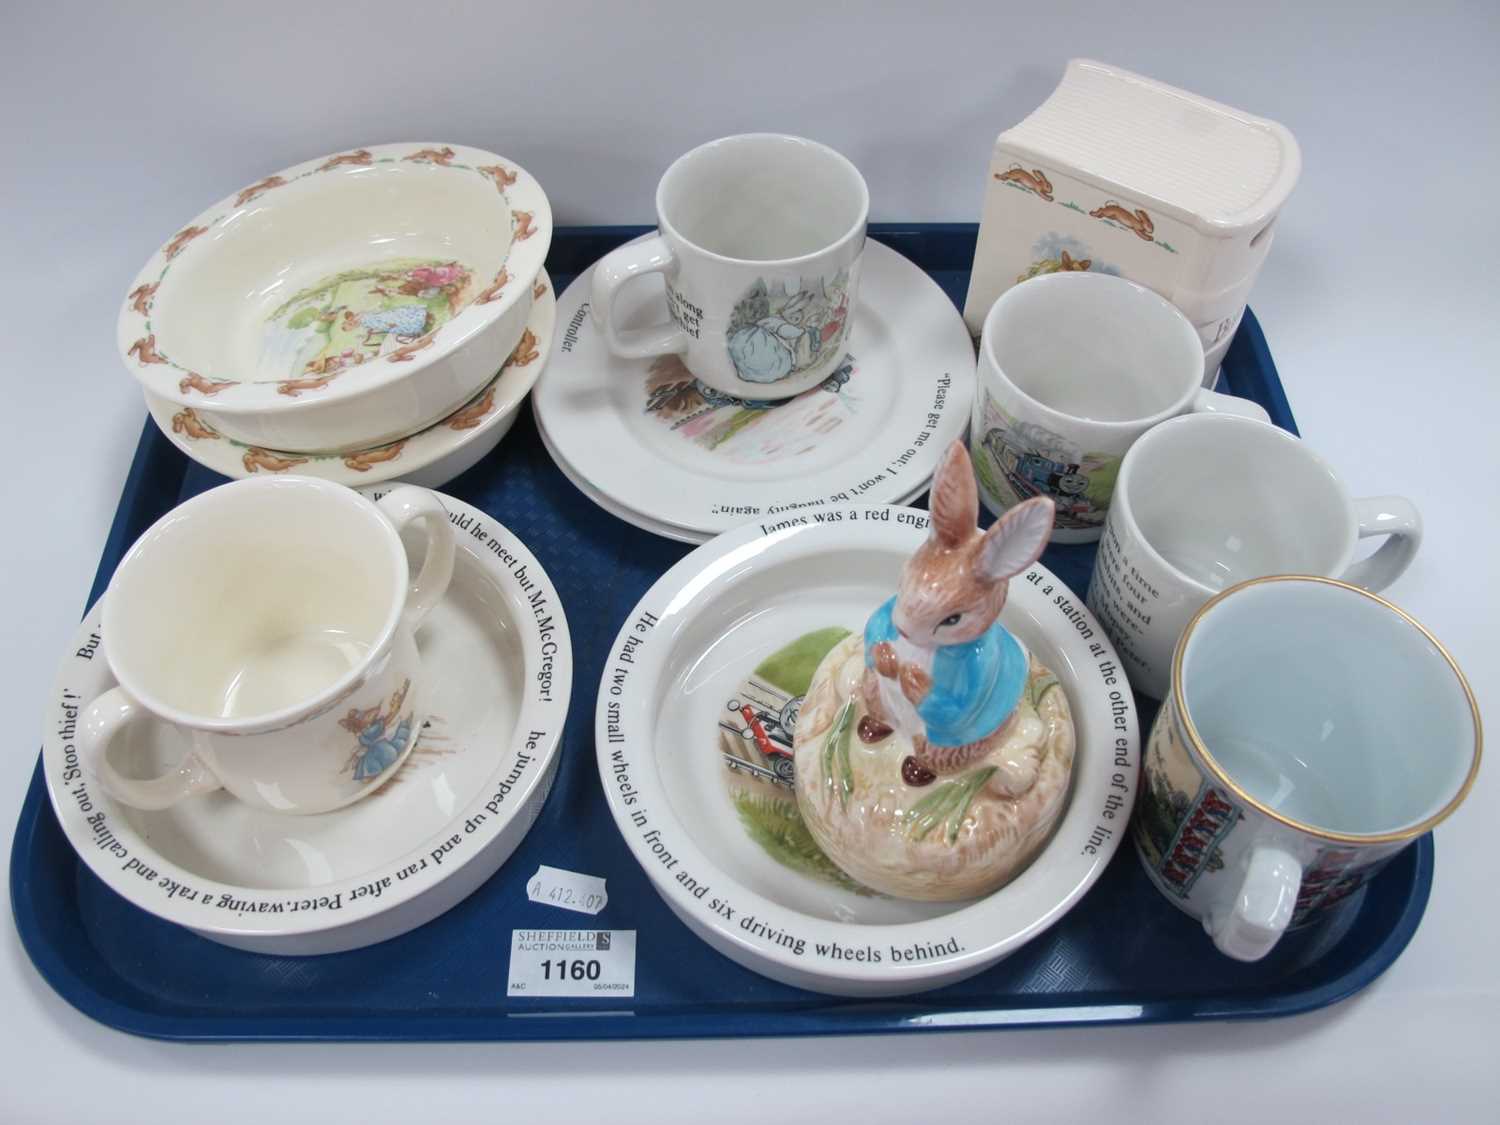 Wedgwood, Thomas The Tank, Peter Rabbit. Doulton Bunnykins and other children's pottery:- One